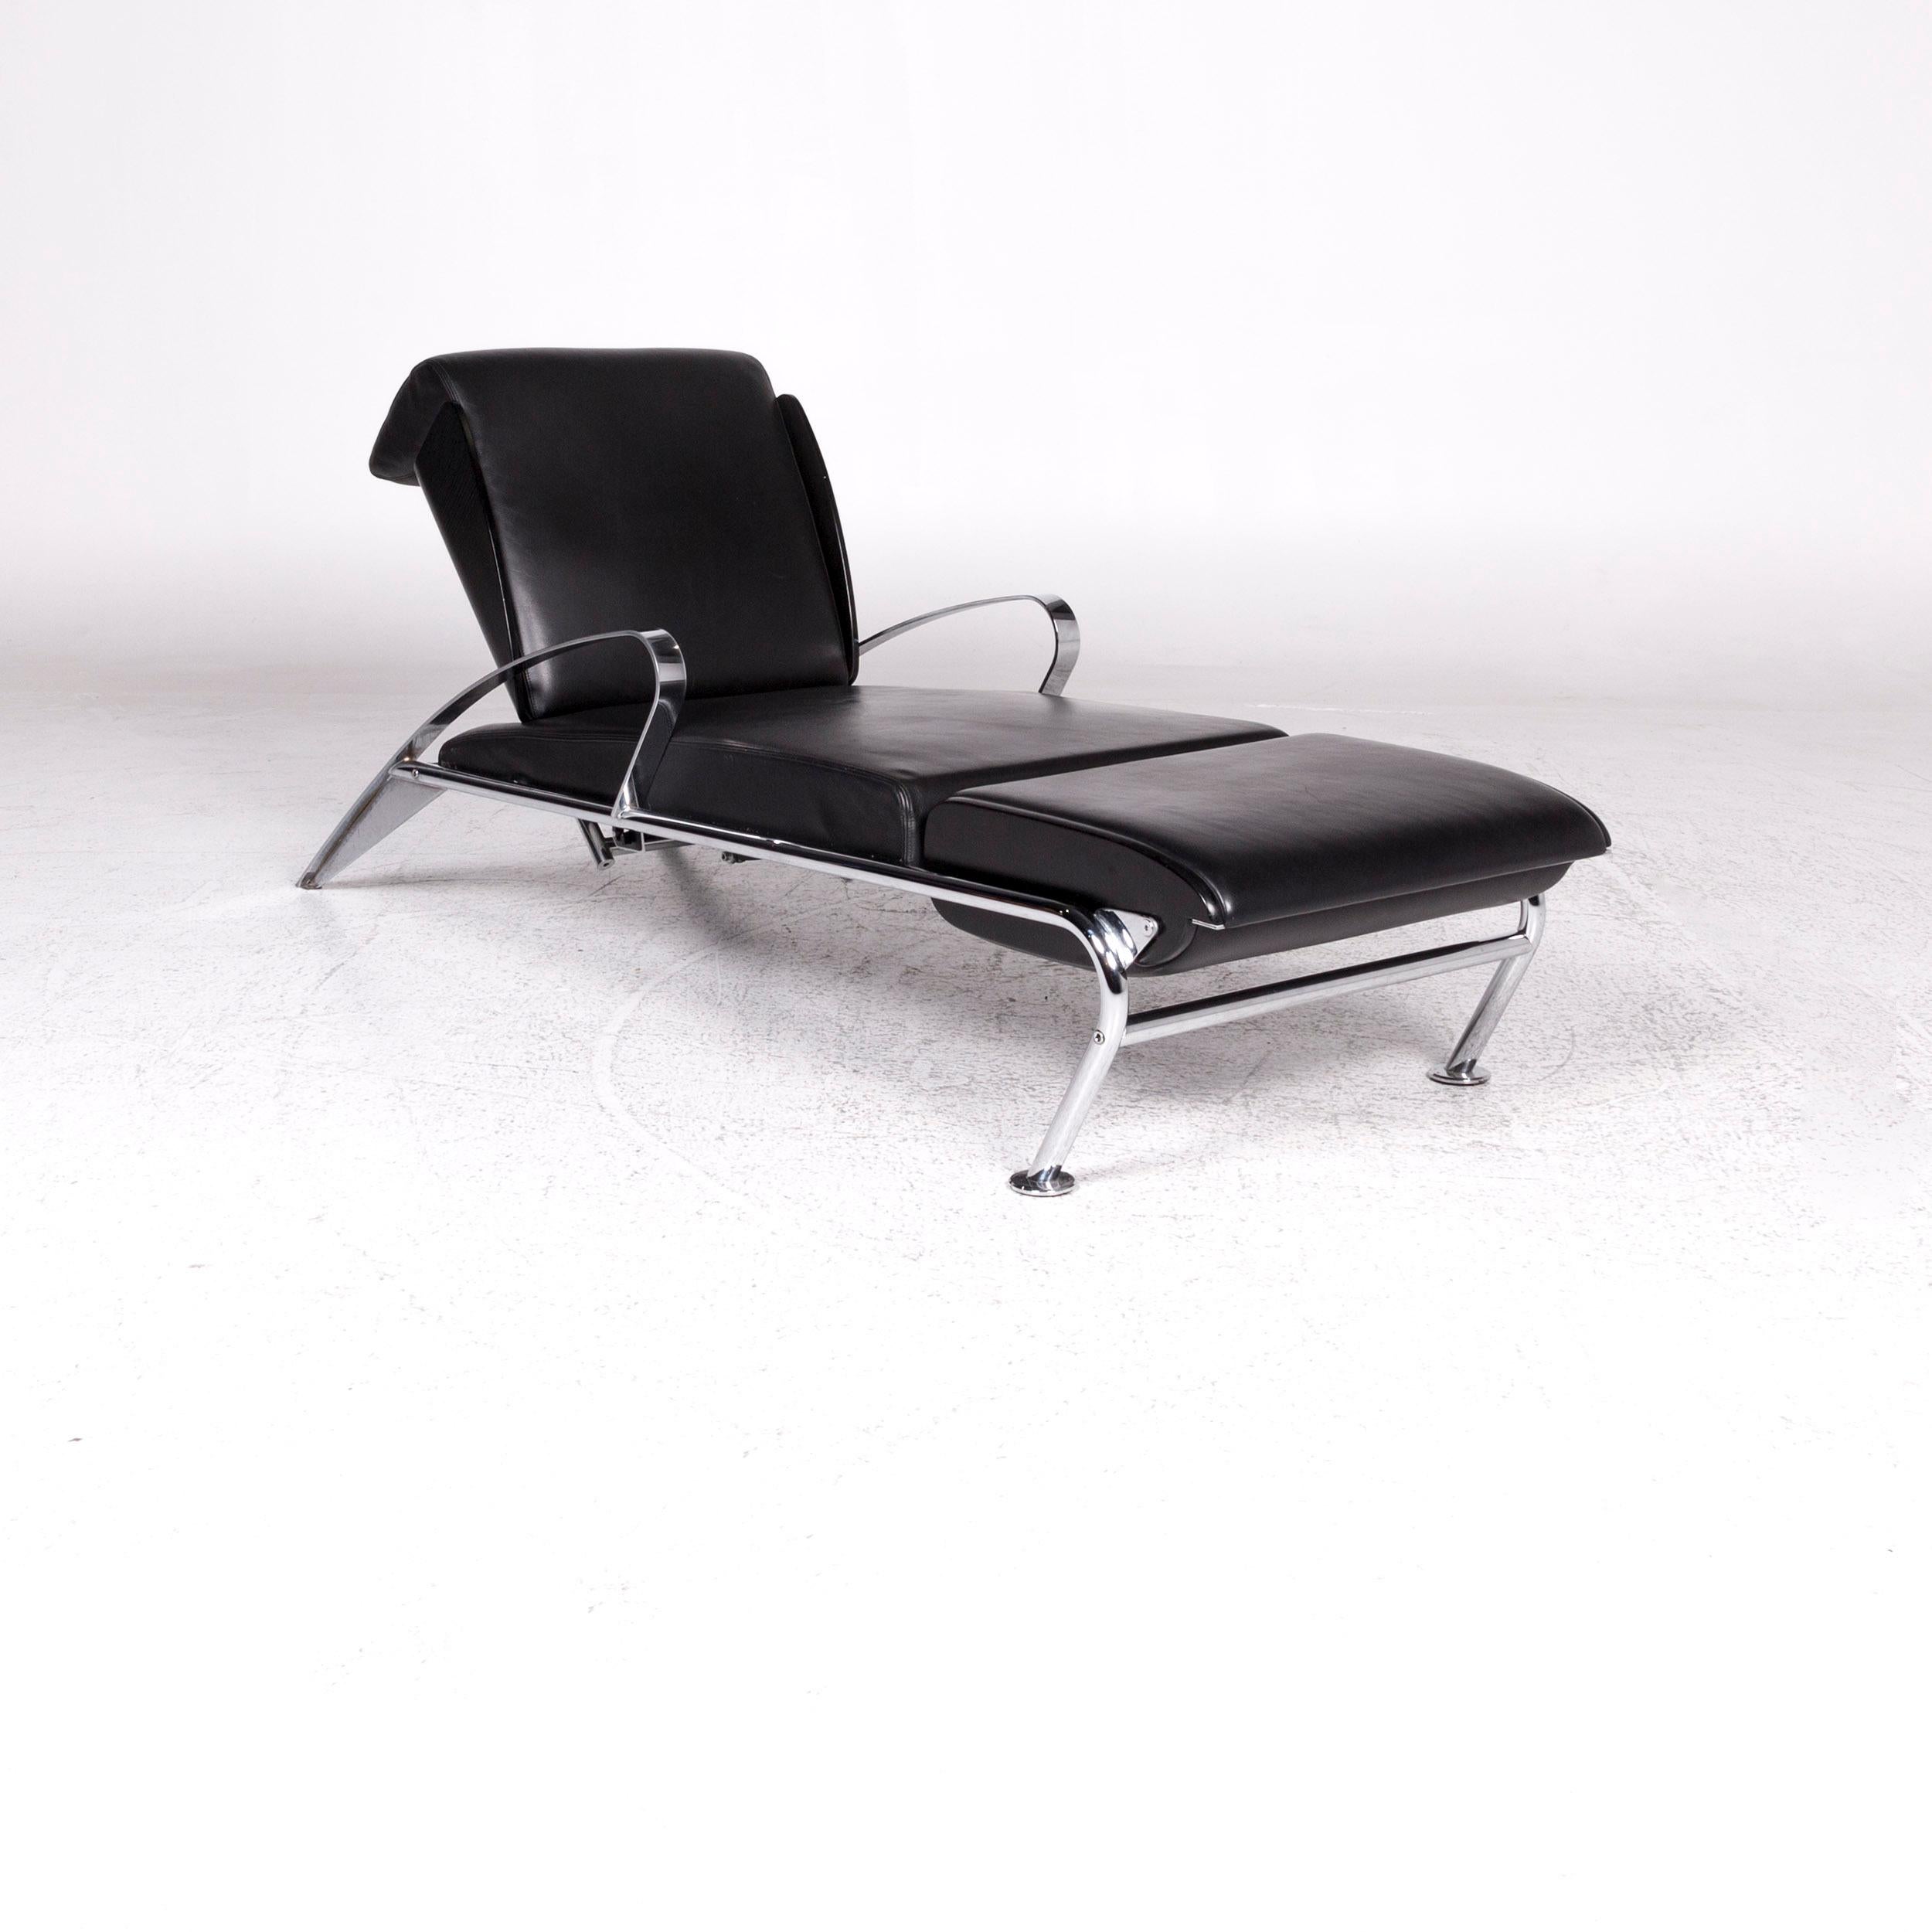 We bring to you a Moroso Massimo leather lounger black relax function.
 
 Product measurements in centimeters:
 
 Depth 186
Width 67
Height 80
Seat-height 37
Rest-height 49
Seat-depth 129
Seat-width 58
Back-height 45.   
  
   